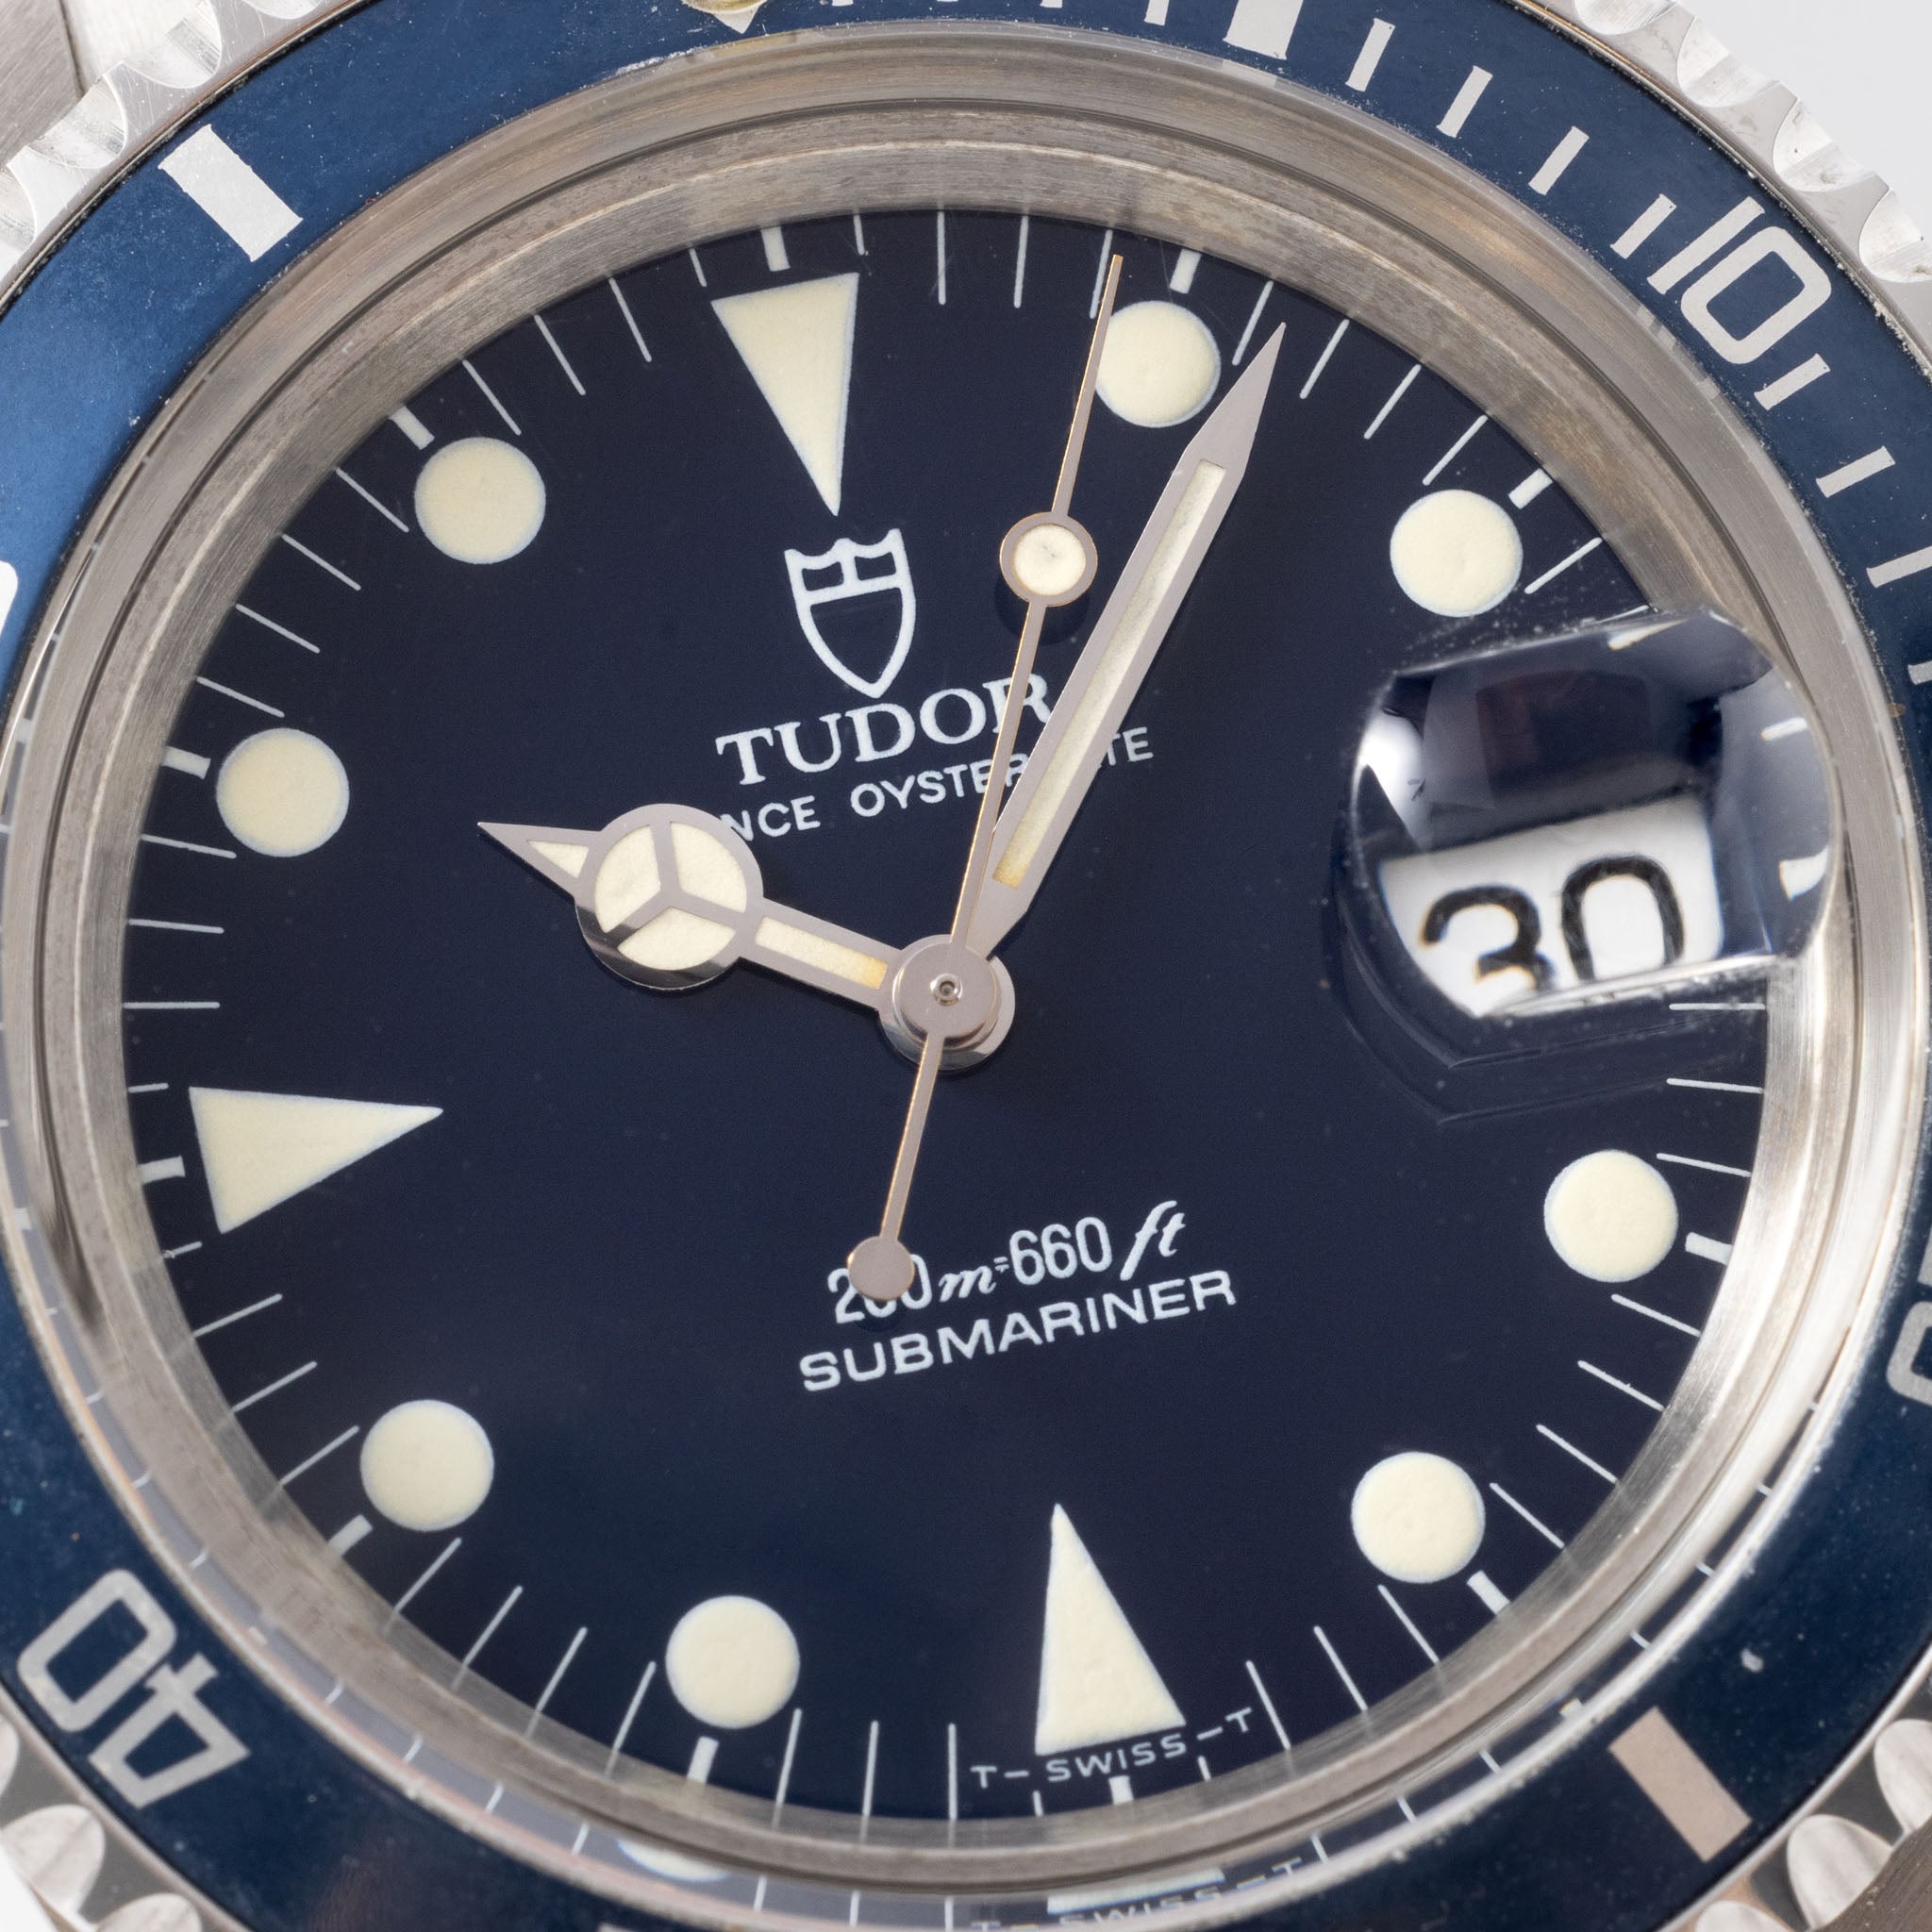 Tudor Submariner Date Blue Dial Box and Accessories Ref 79090